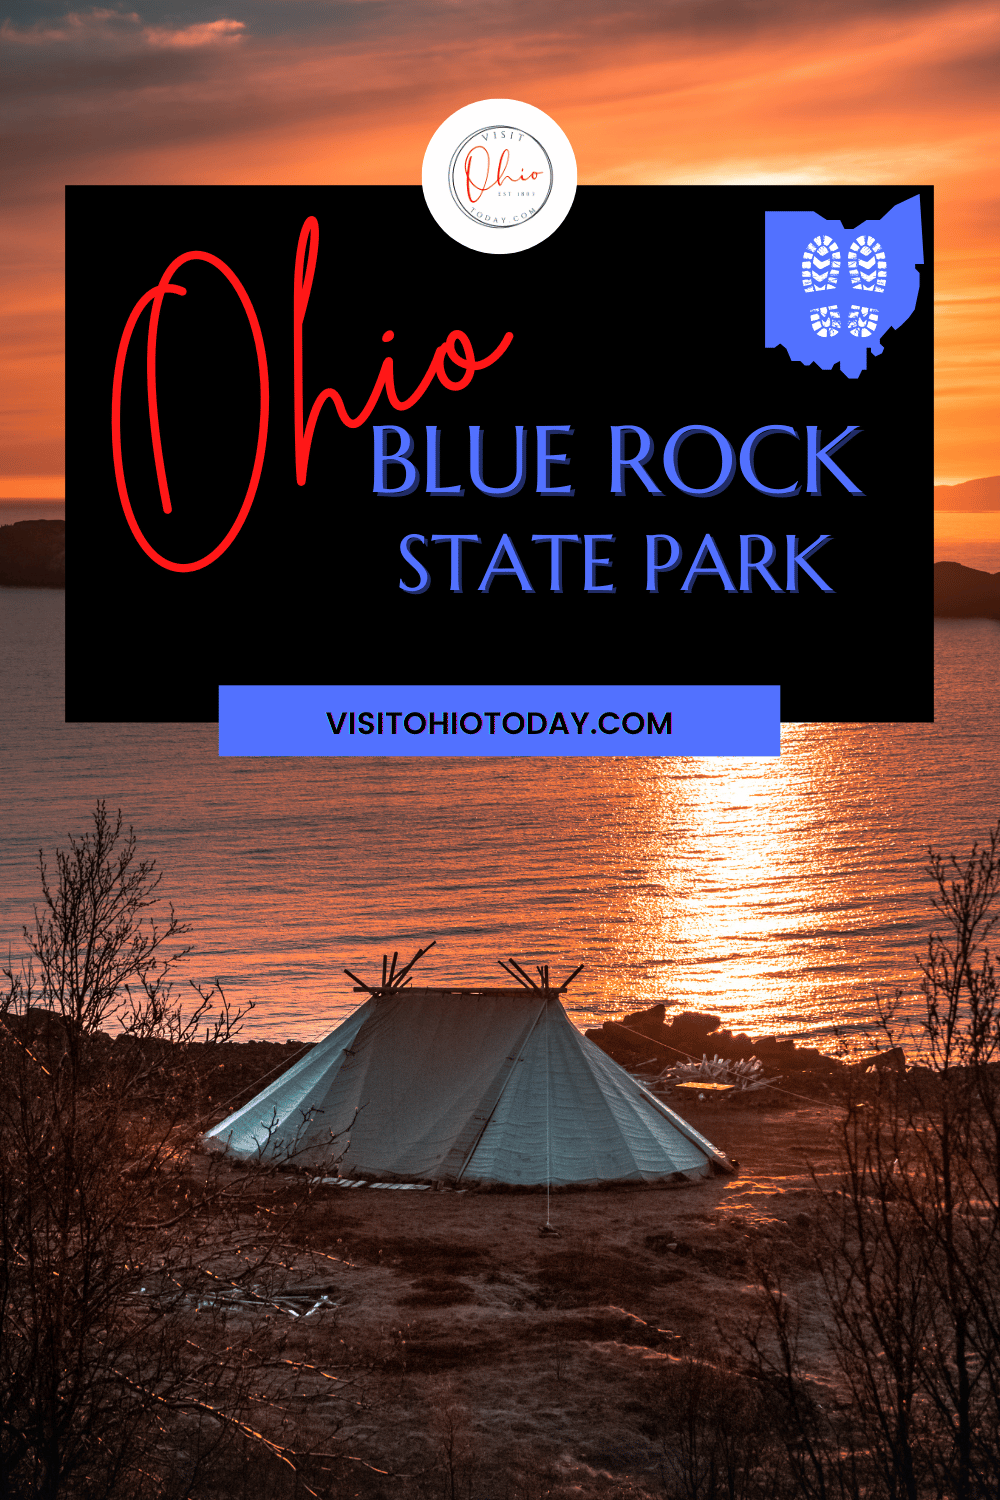 Blue Rock State Park is located within the southeast of Ohio. This part of Ohio is blessed with amazing hills and wonderful forests. If you like to escape to nature, then this is the place to visit! | Blue Rock State Park | Blue Rock Ohio | Muskingum County